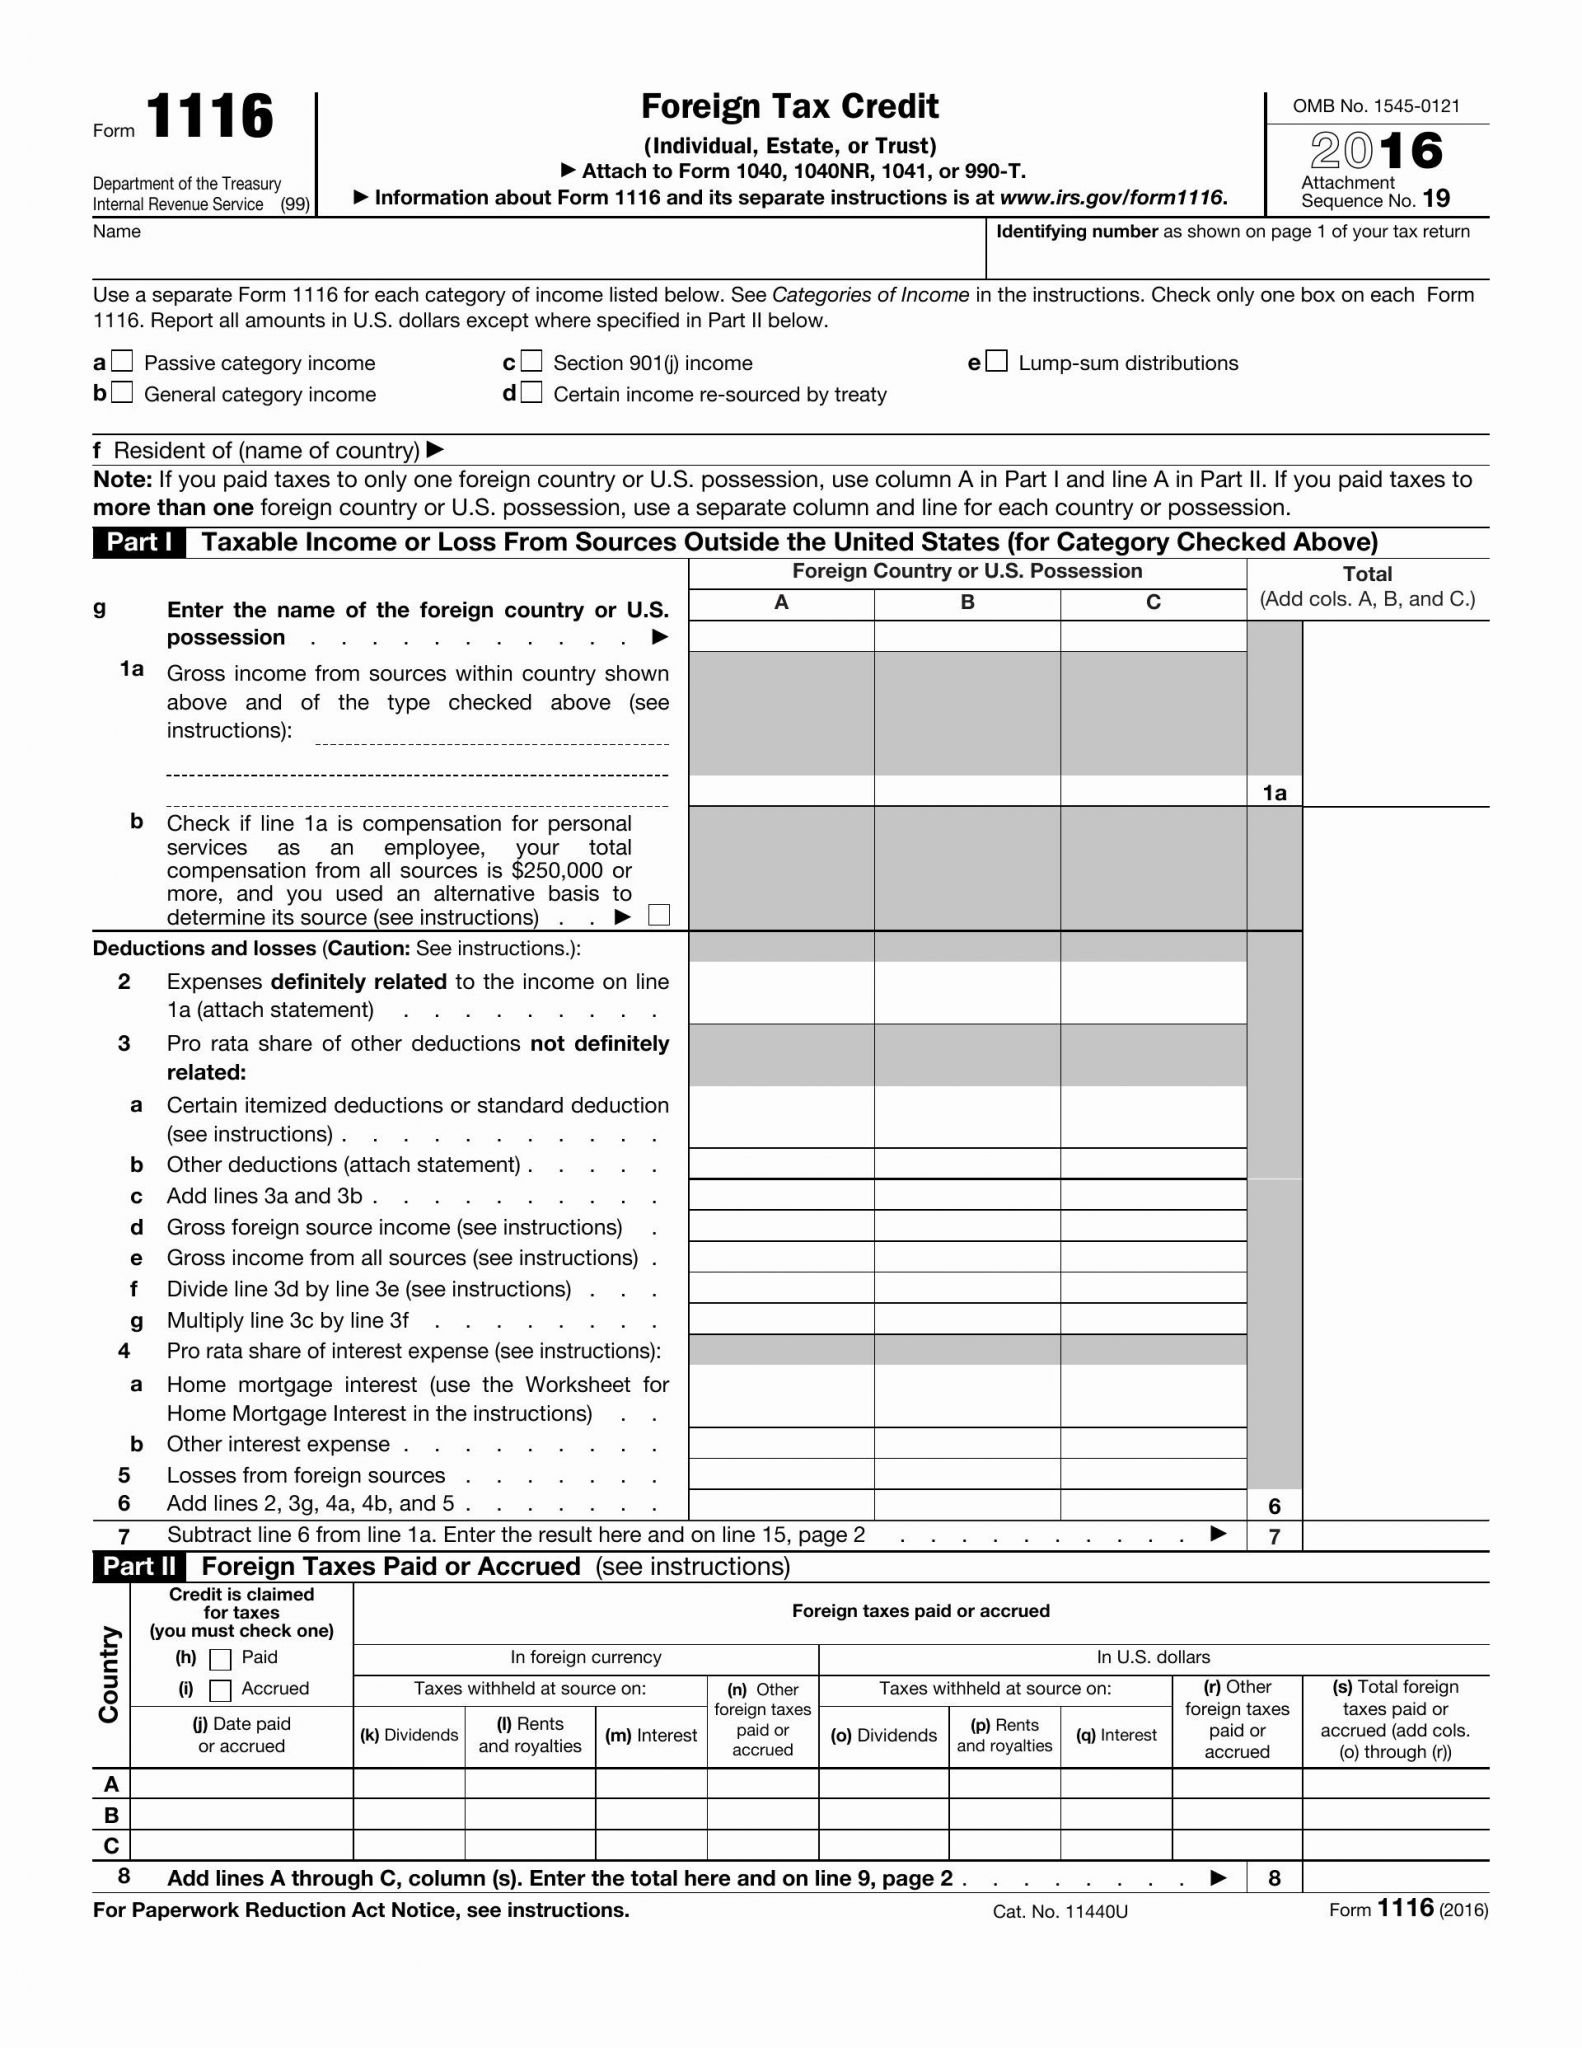 Credit Limit Worksheet 2016  Briefencounters Along With Credit Limit Worksheet 2016